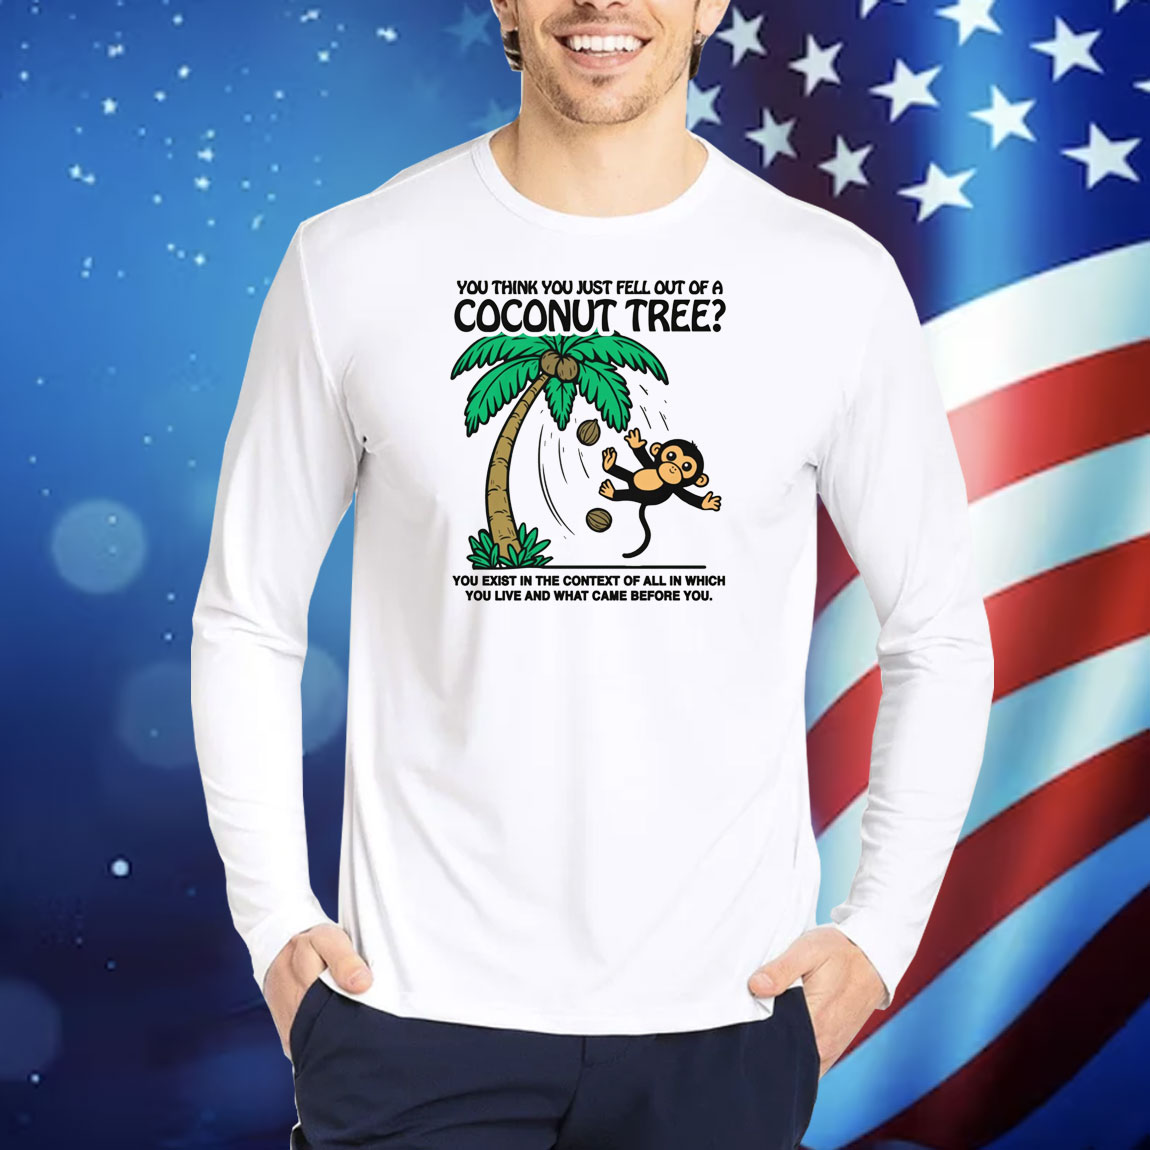 You Think You Just Fell Out Of A Coconut Tree? TShirts